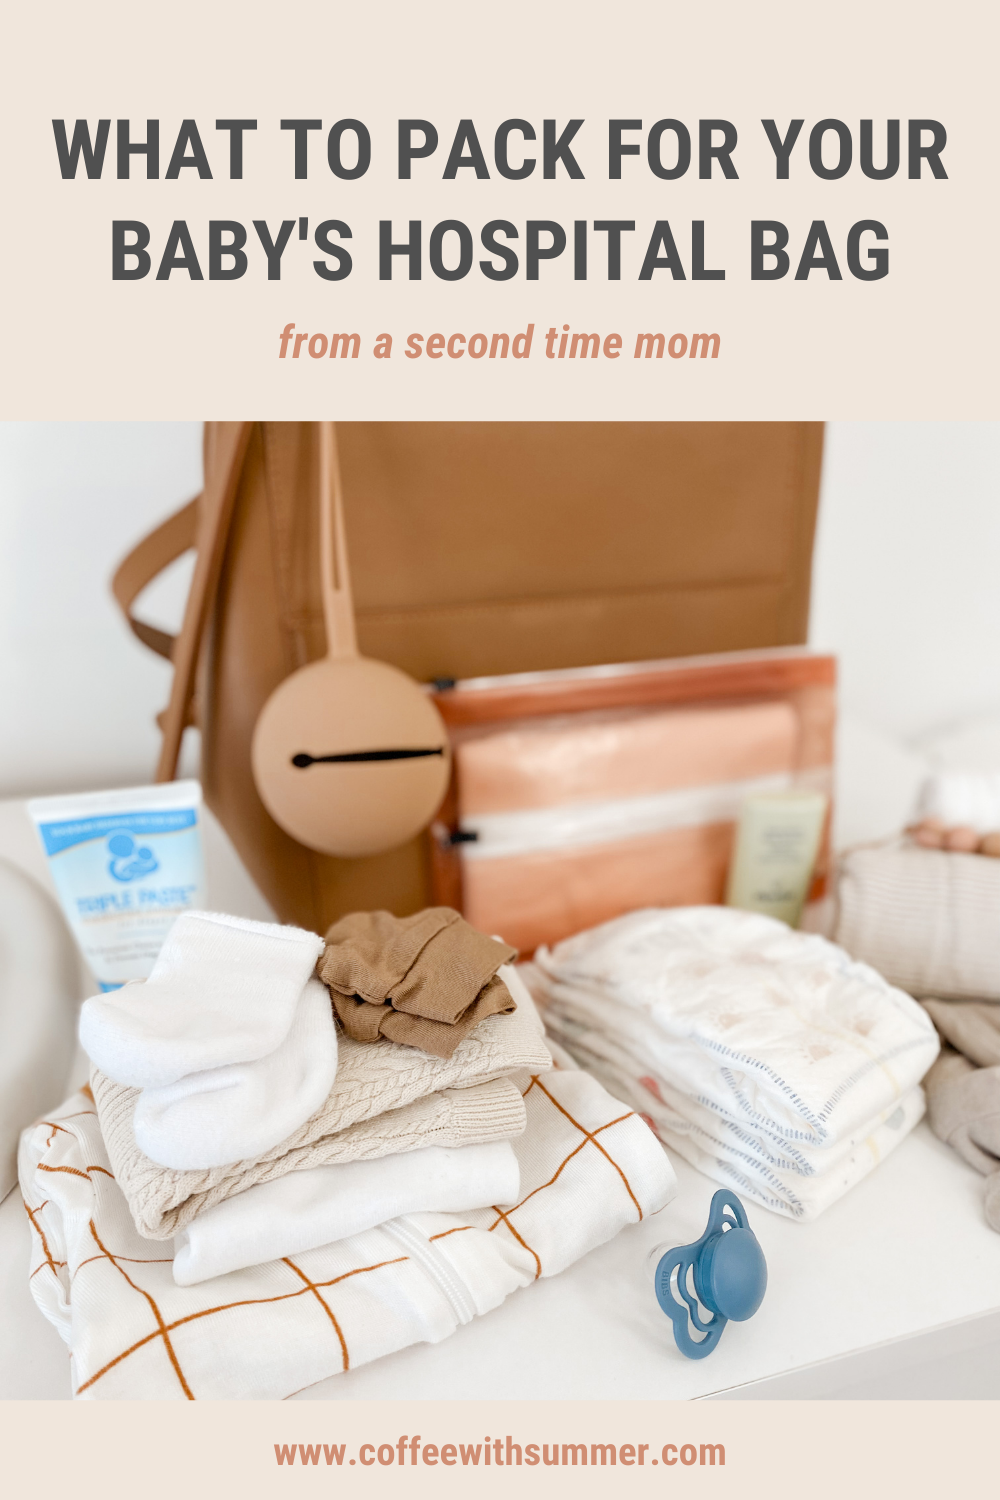 Hospital Bags: Why You Need One and When to Start Packing